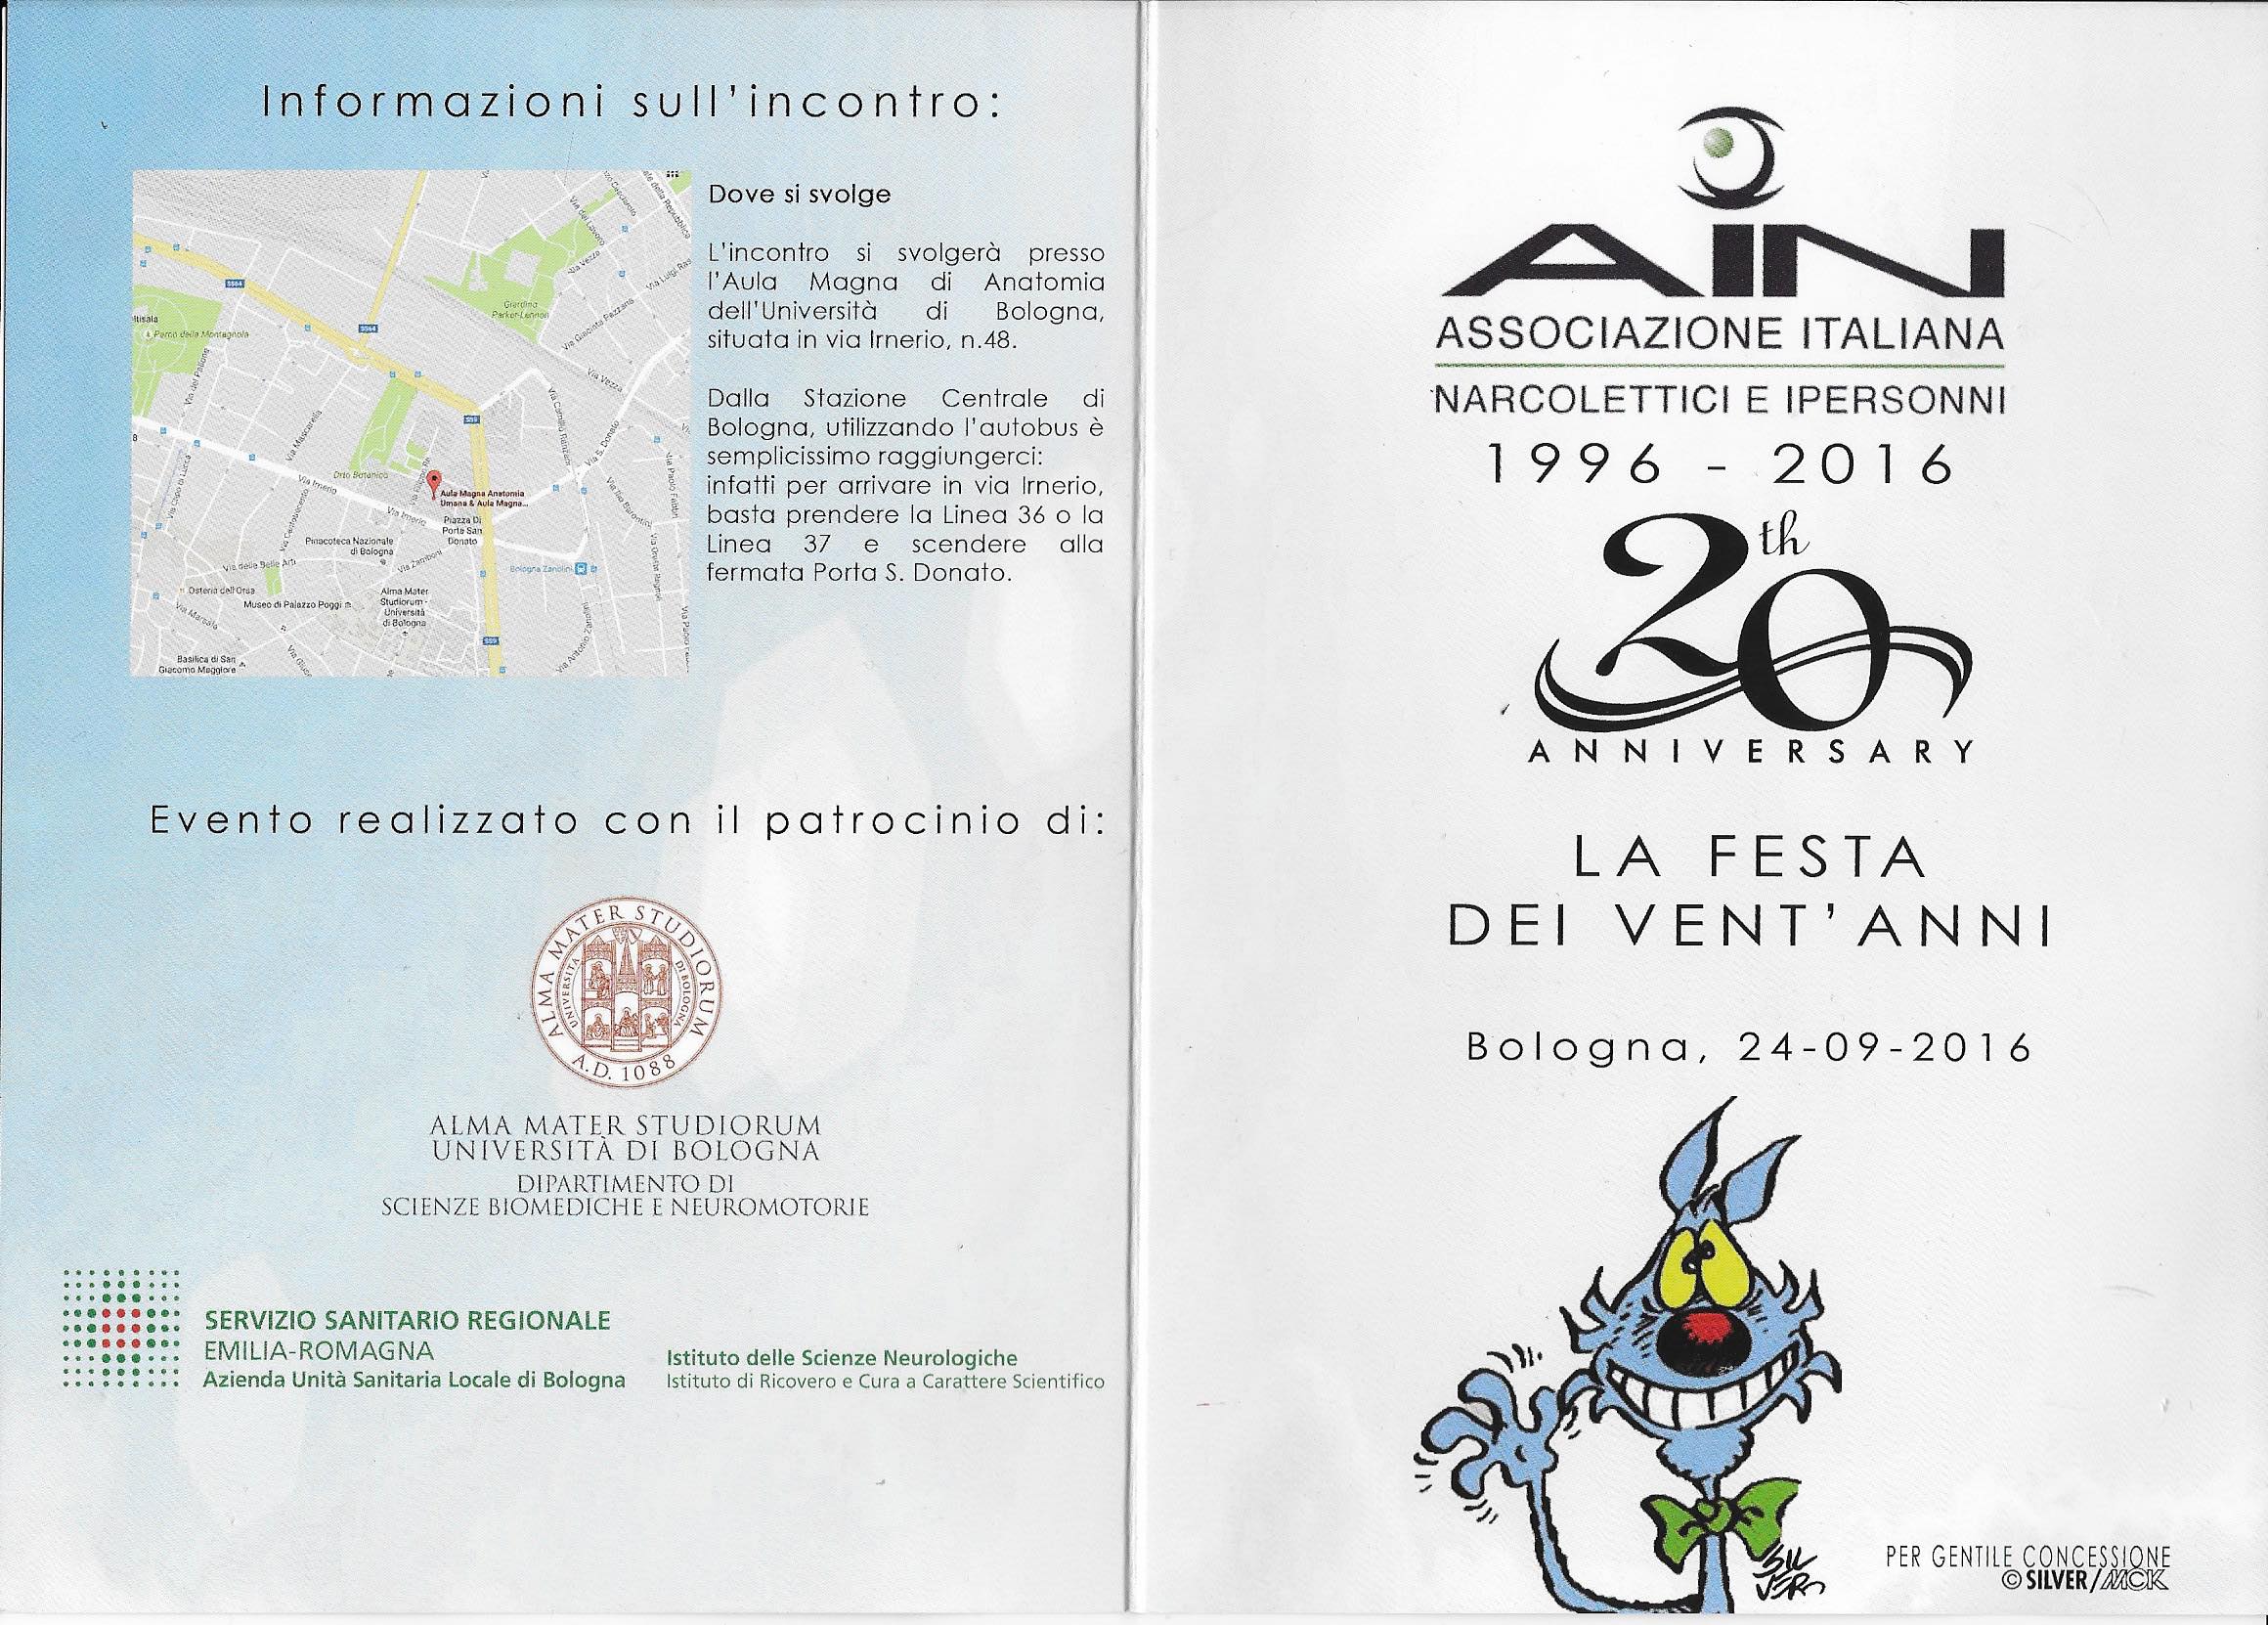 italian-narcolepsy-conference-program-front-and-back